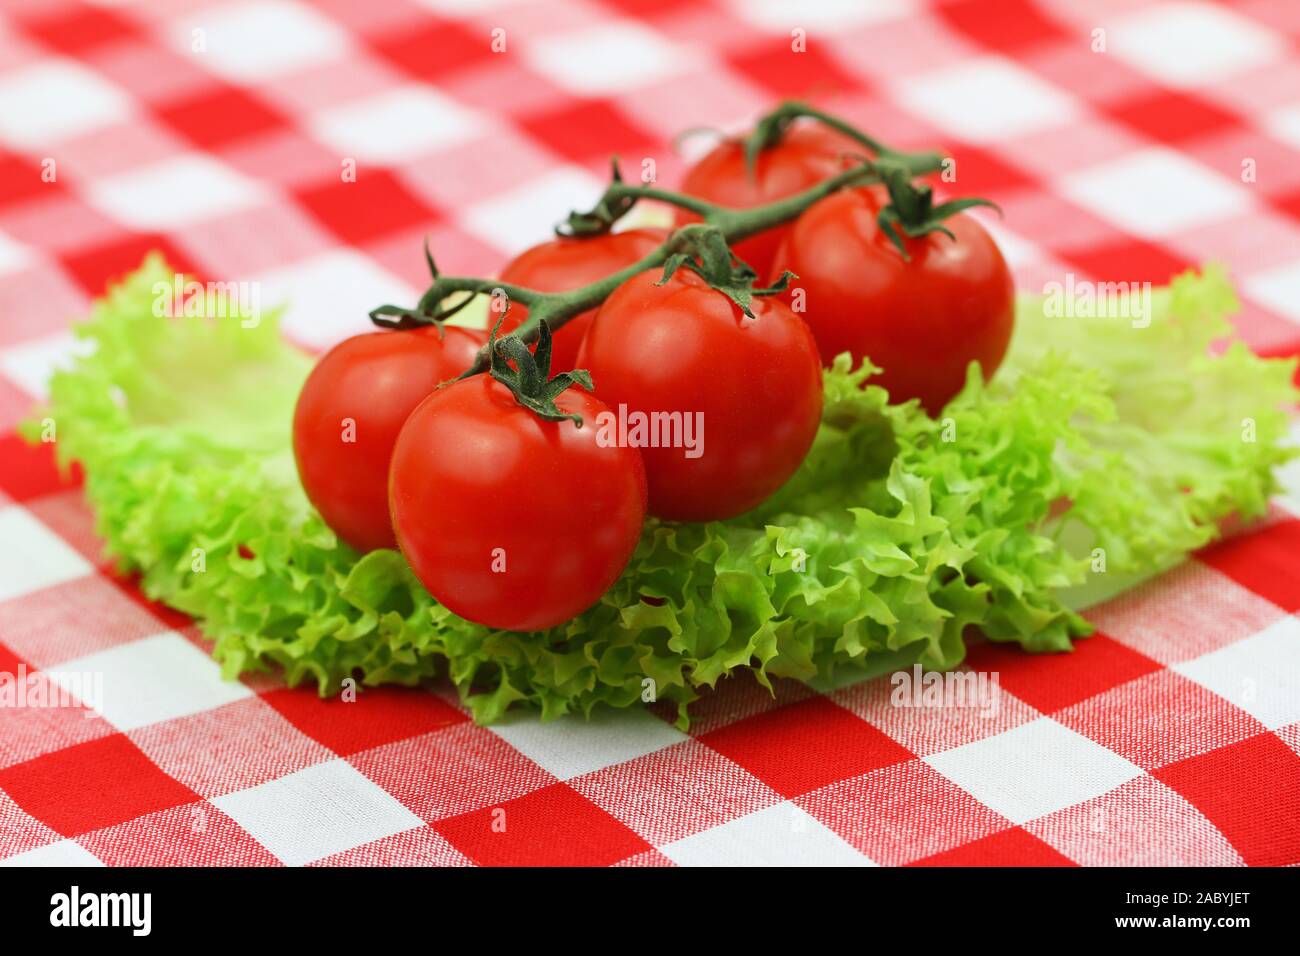 Juicy and ripe cherry tomatoes on vivid green lettuce leaves on red and white checkered cloth Stock Photo